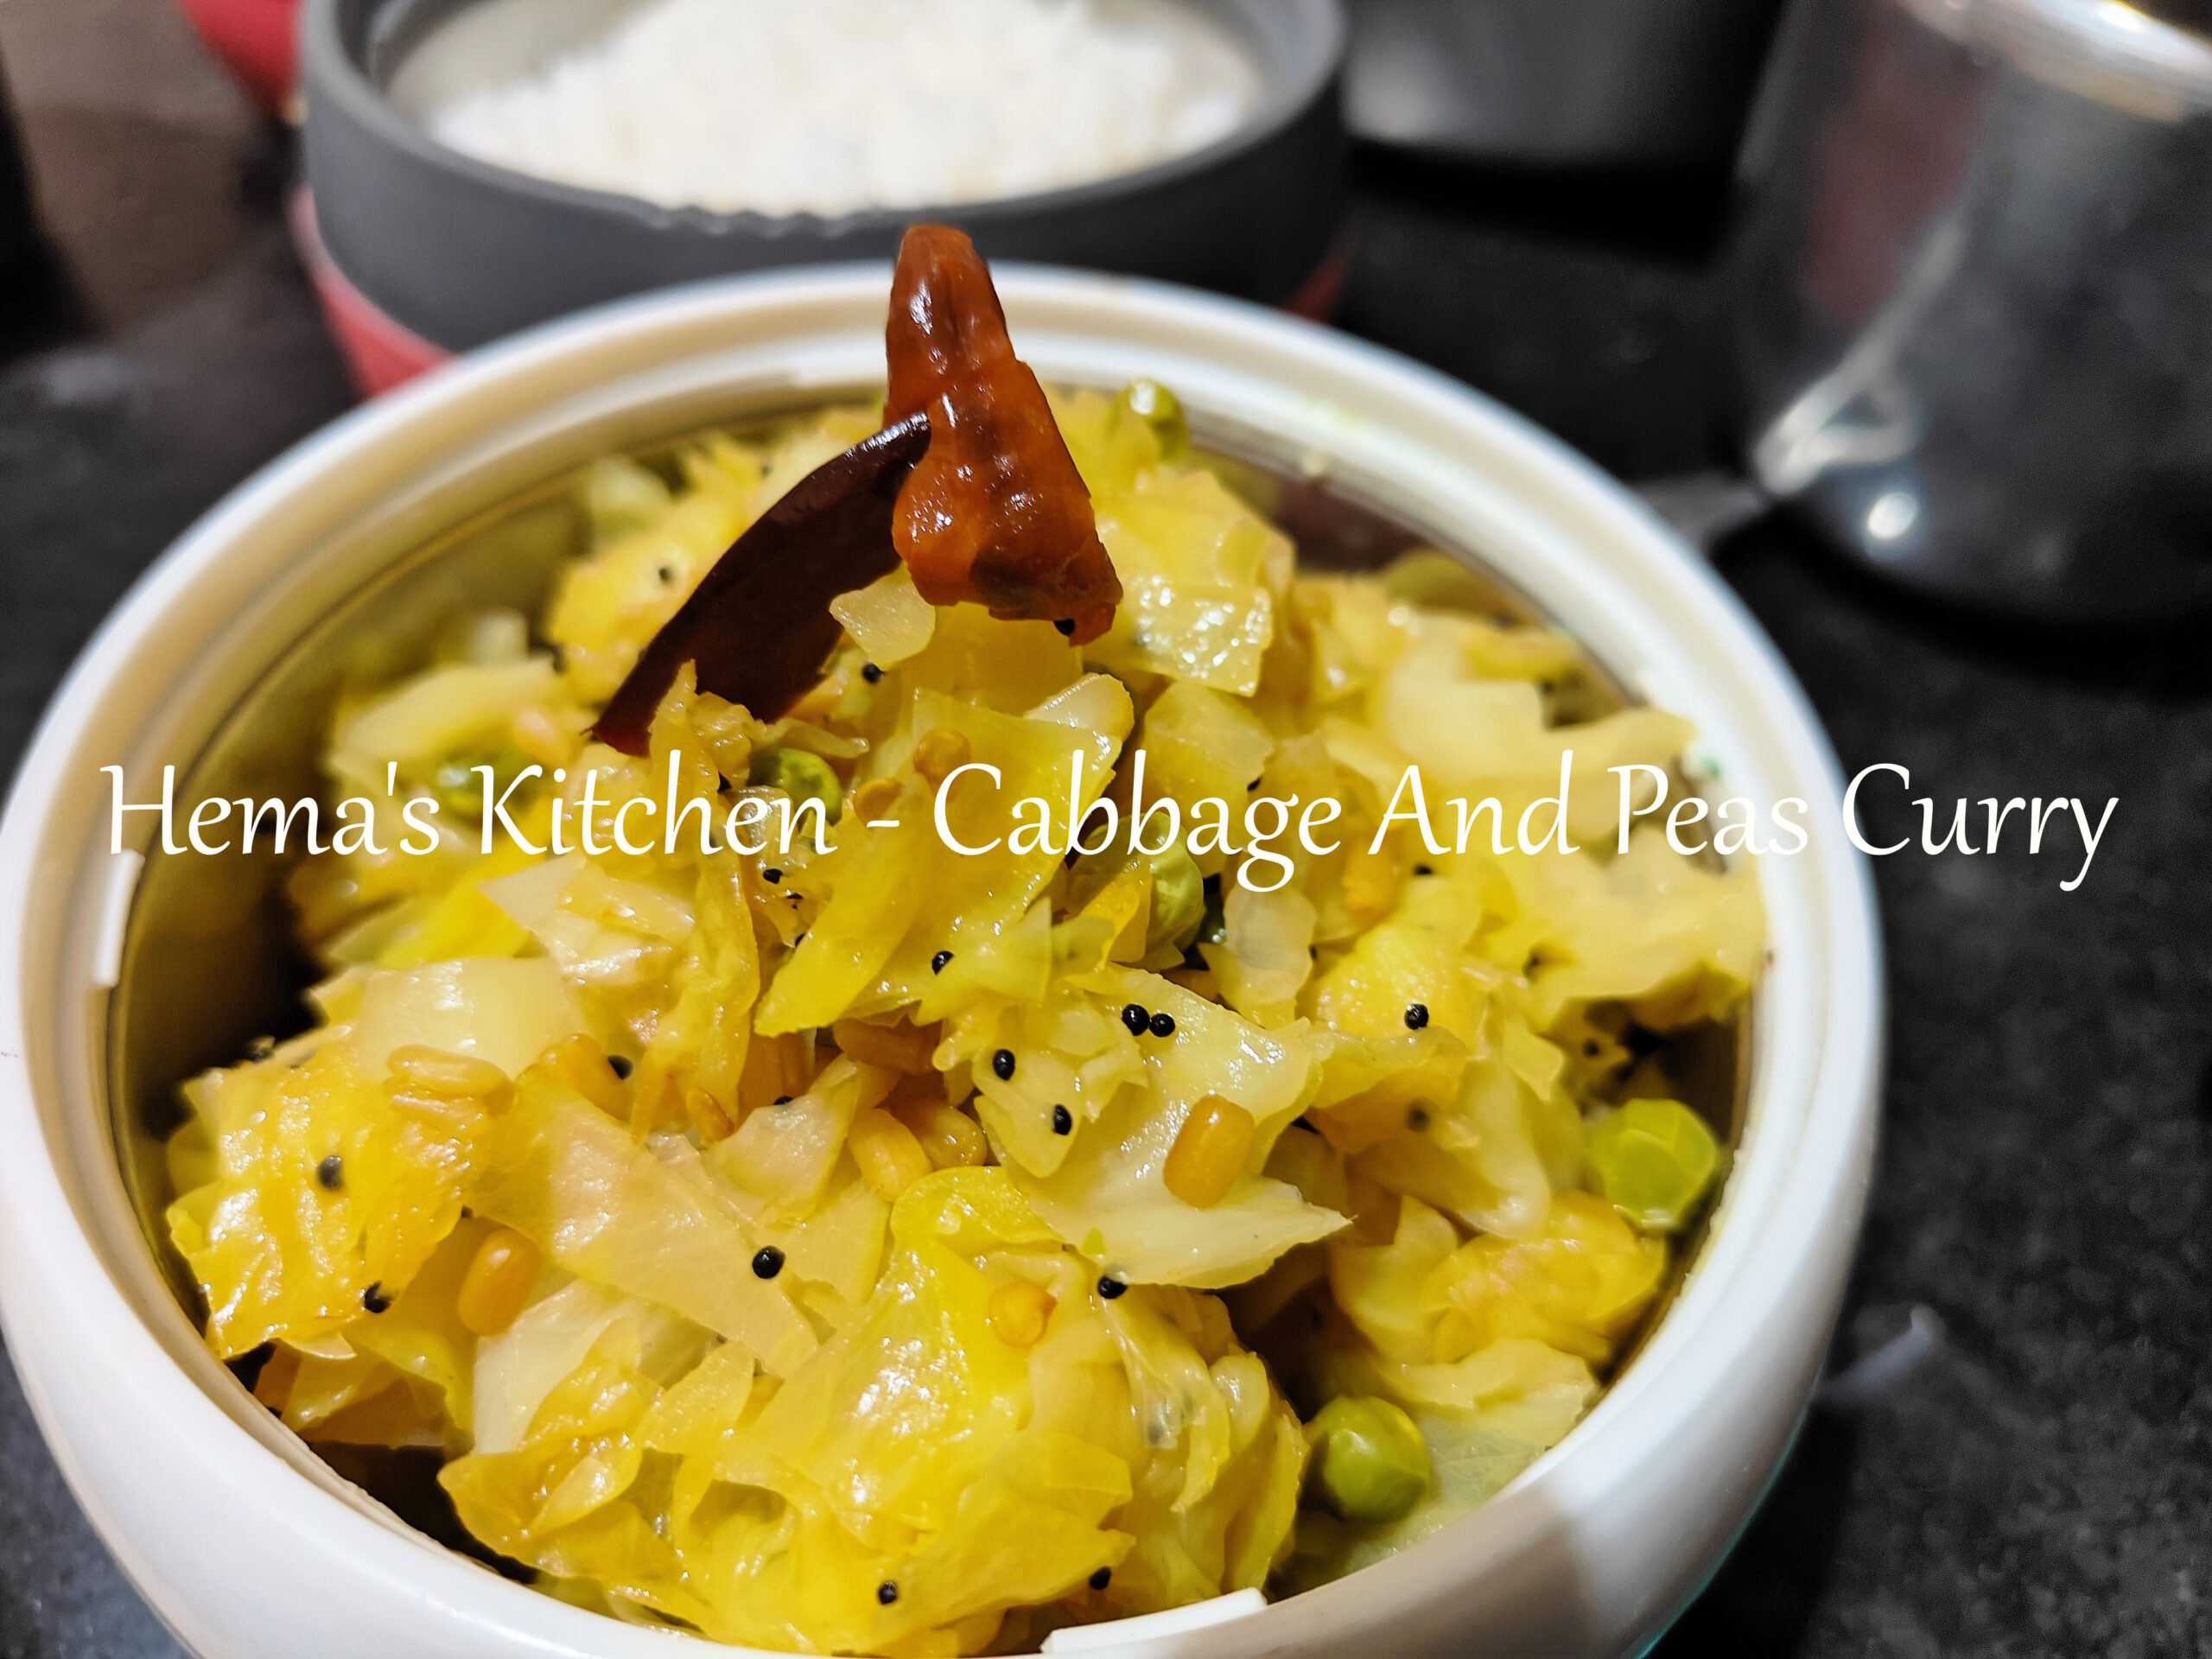 Cabbage and peas curry